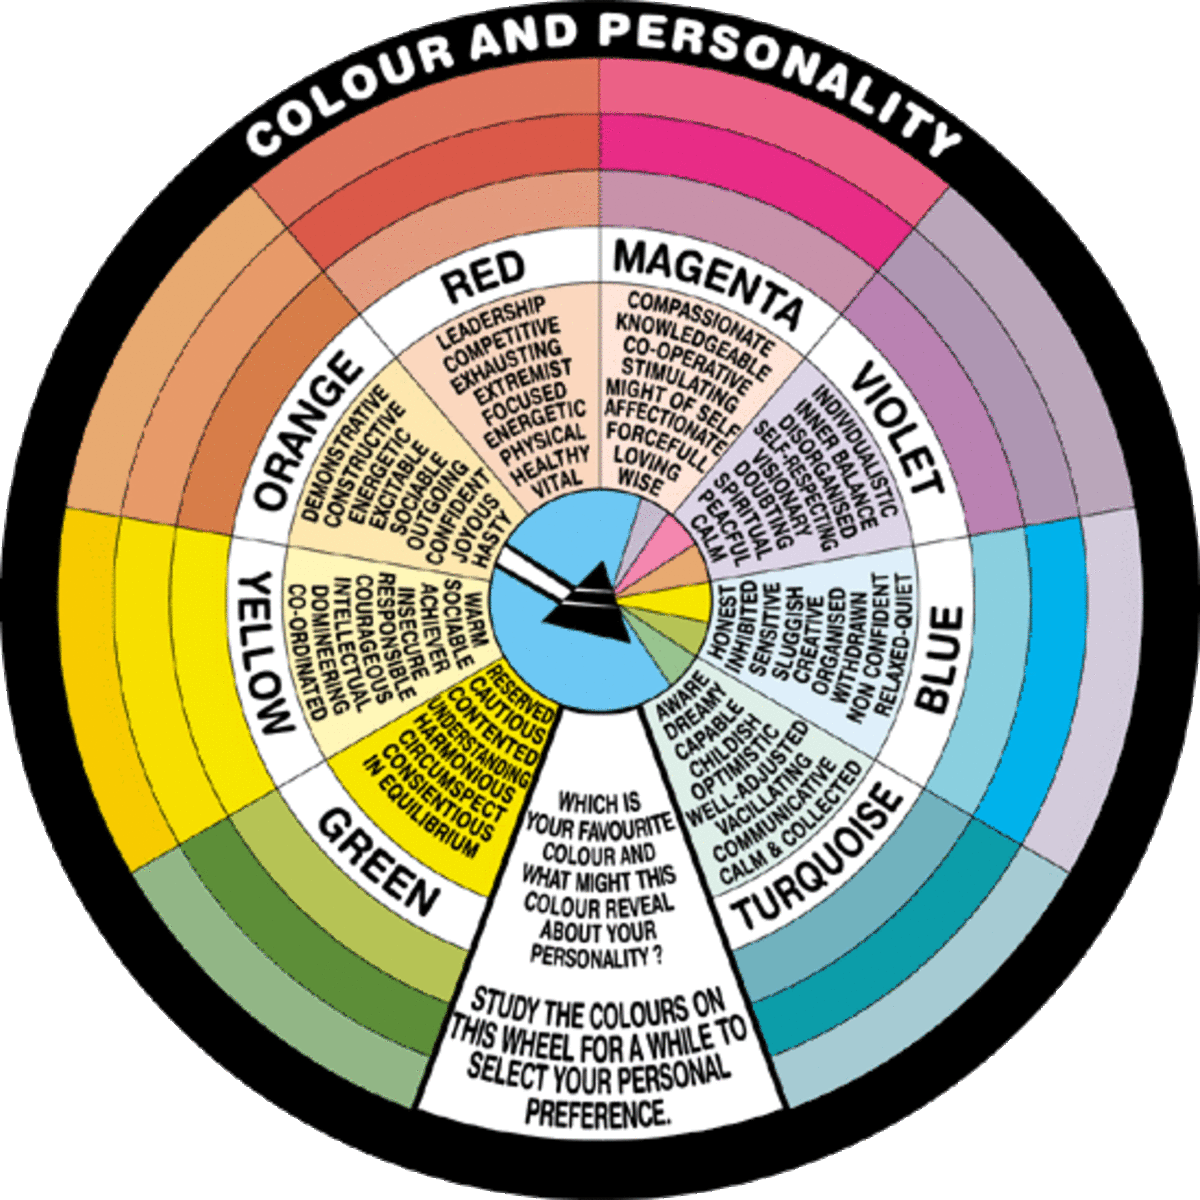 This wheel shows some of the meaning behind colors.